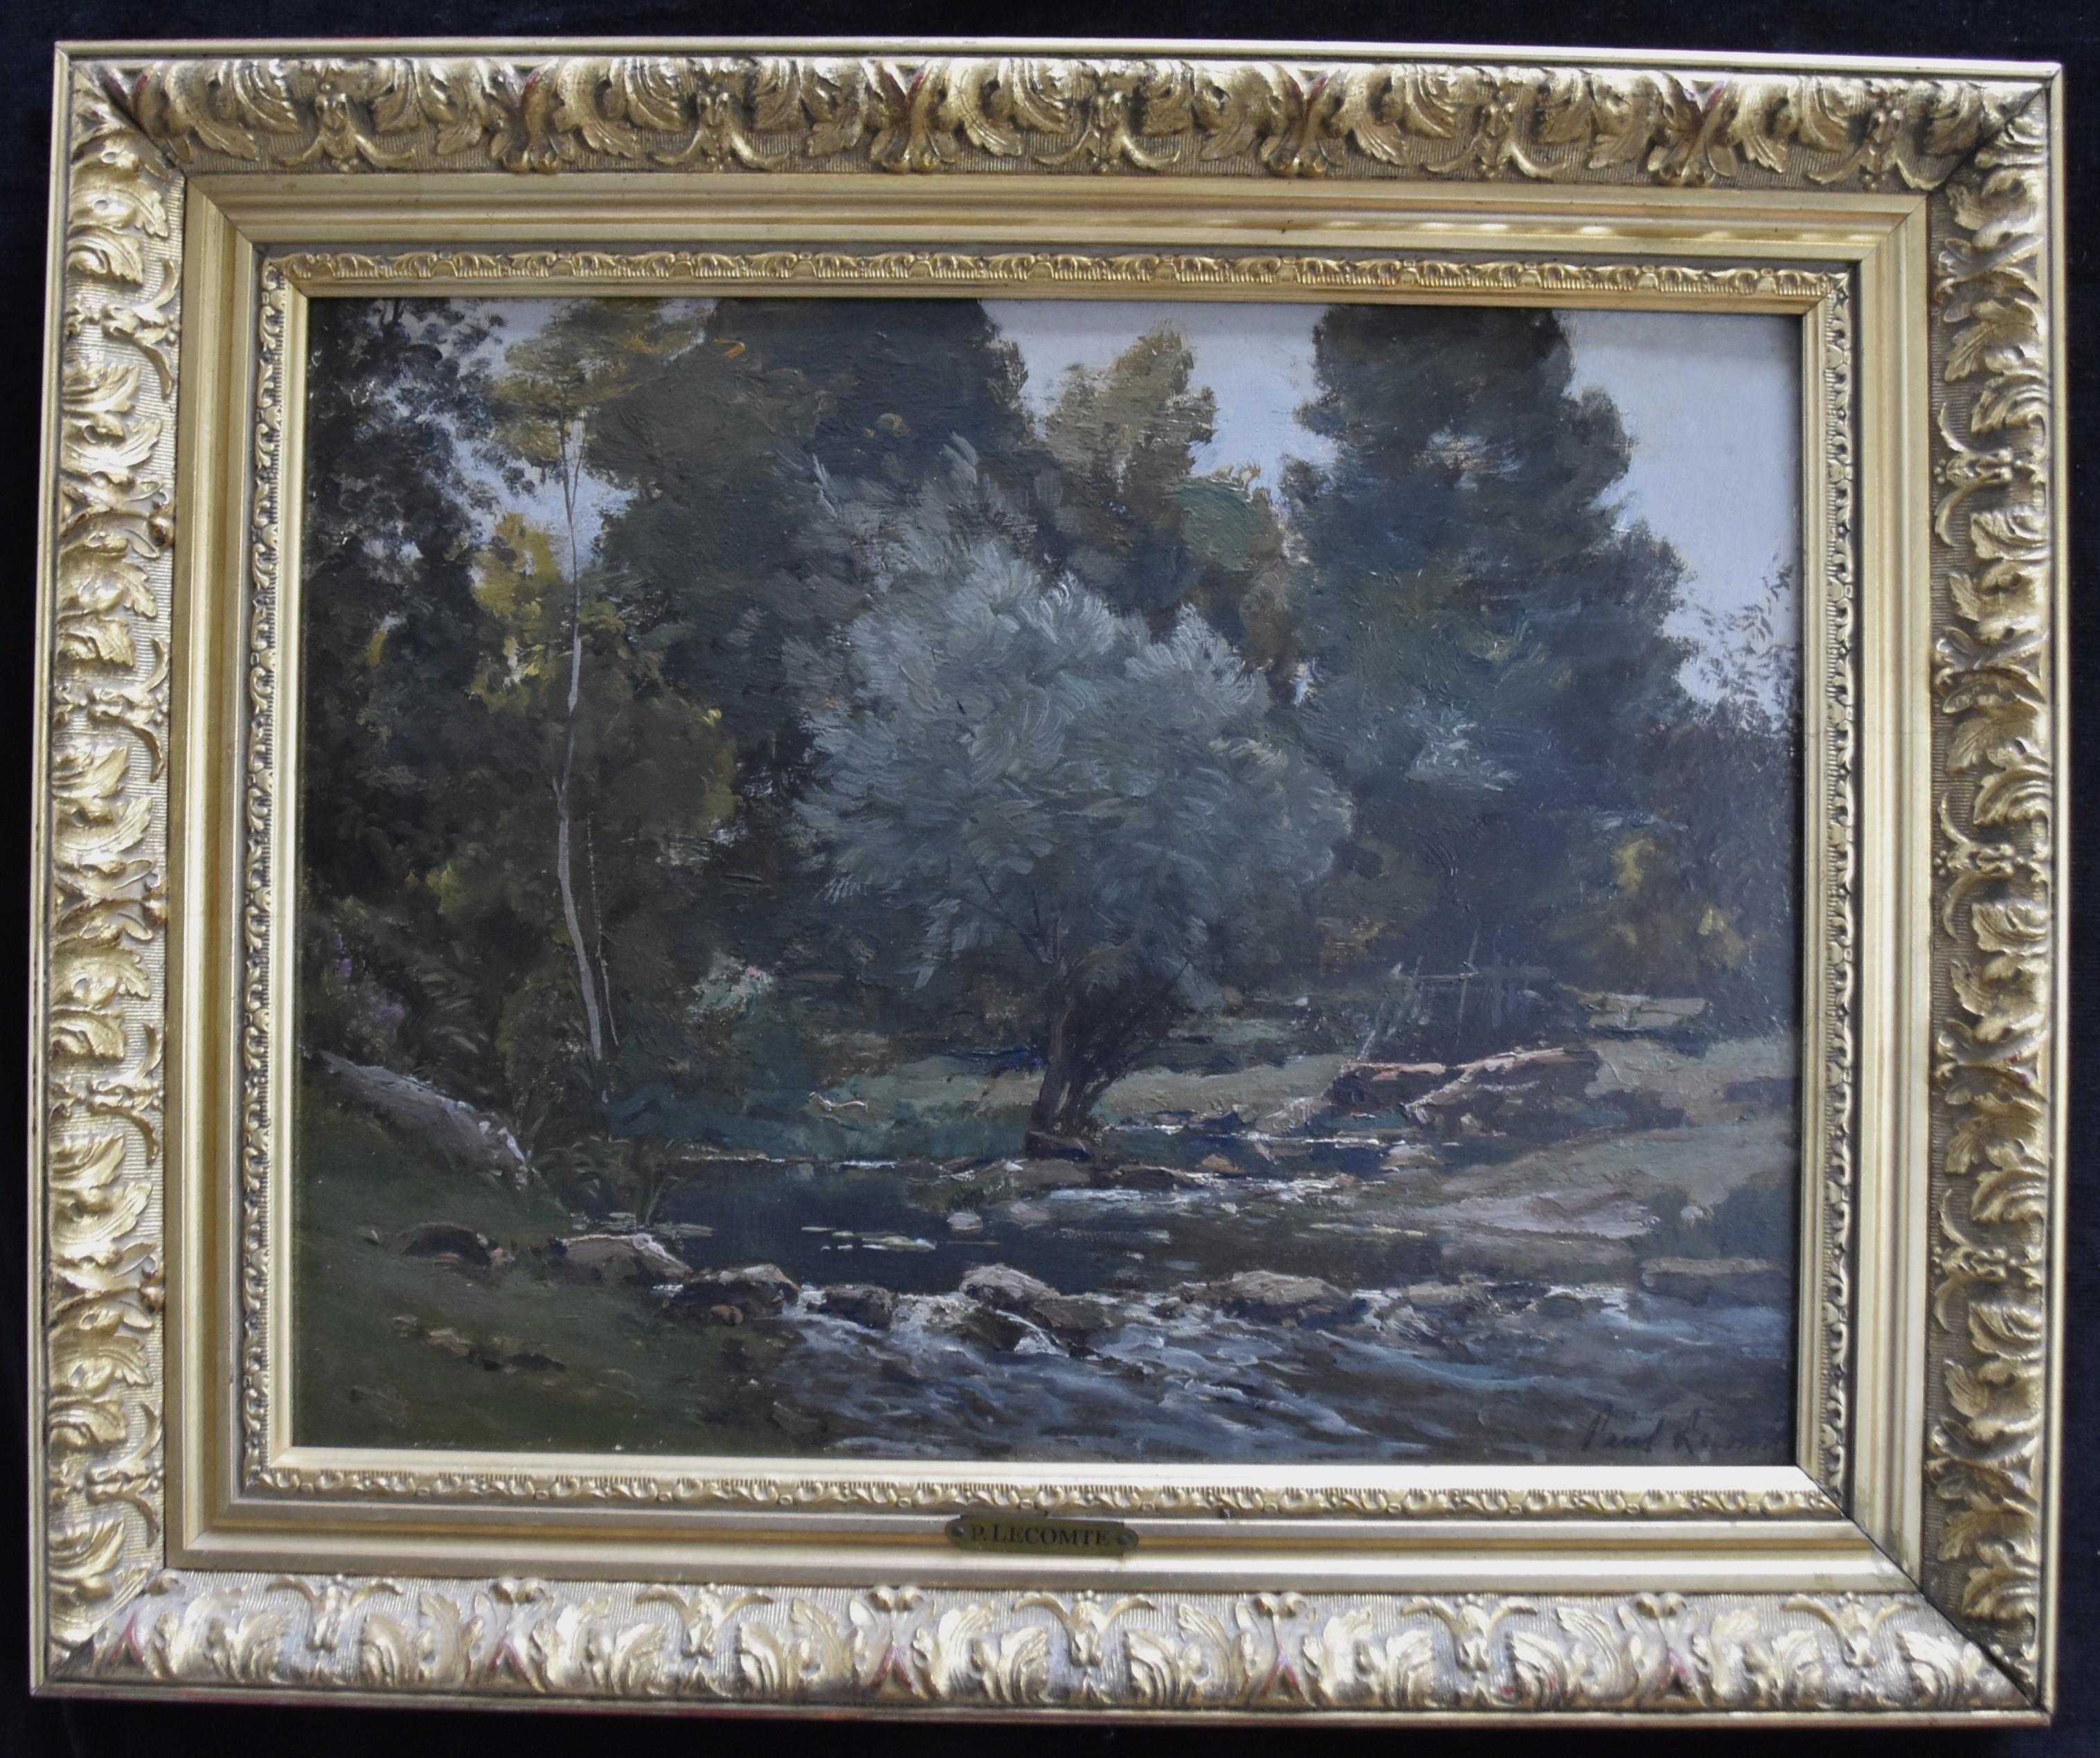 Paul Lecomte (1842-1920)
A Landscape with a river
Oil on cardboard panel
signed on the lower right
27 x 34.5 cm
In good condition, a very tiny lack of paint on the lower left border
Framed 37  x 44.5 cm  vintage frame, some lacks in the gilding (see